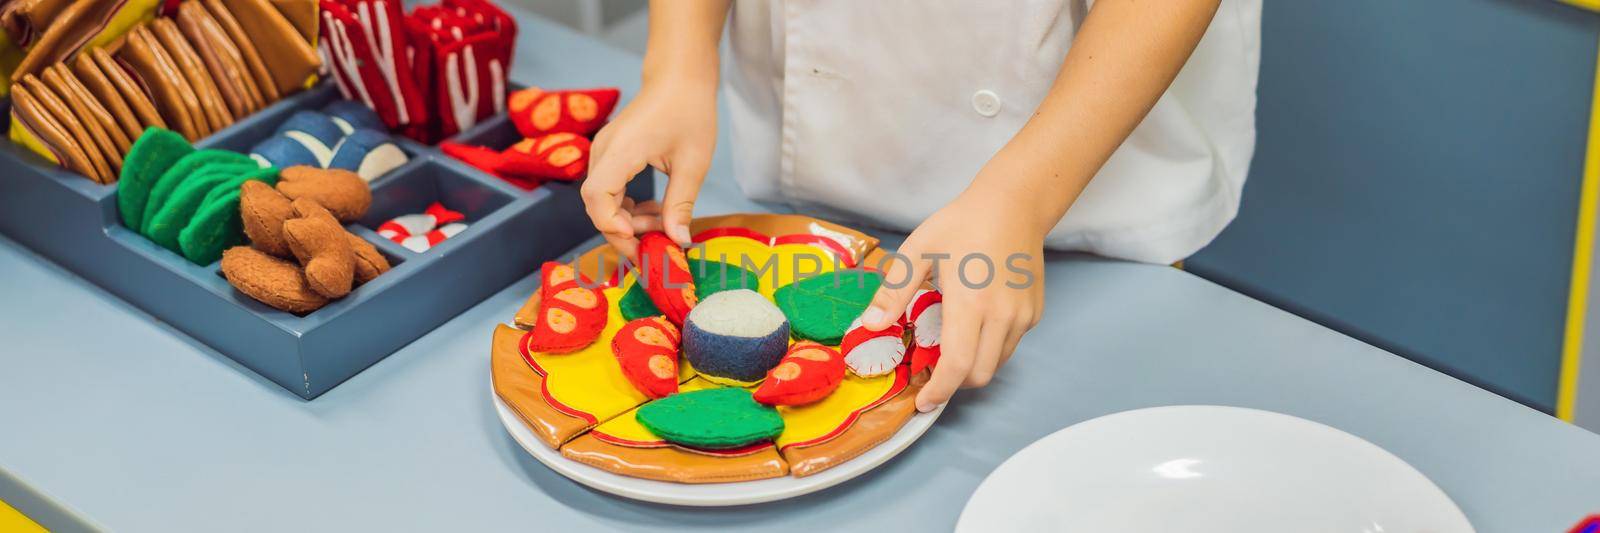 The boy plays in the toy kitchen, cooks a pizza BANNER, LONG FORMAT by galitskaya